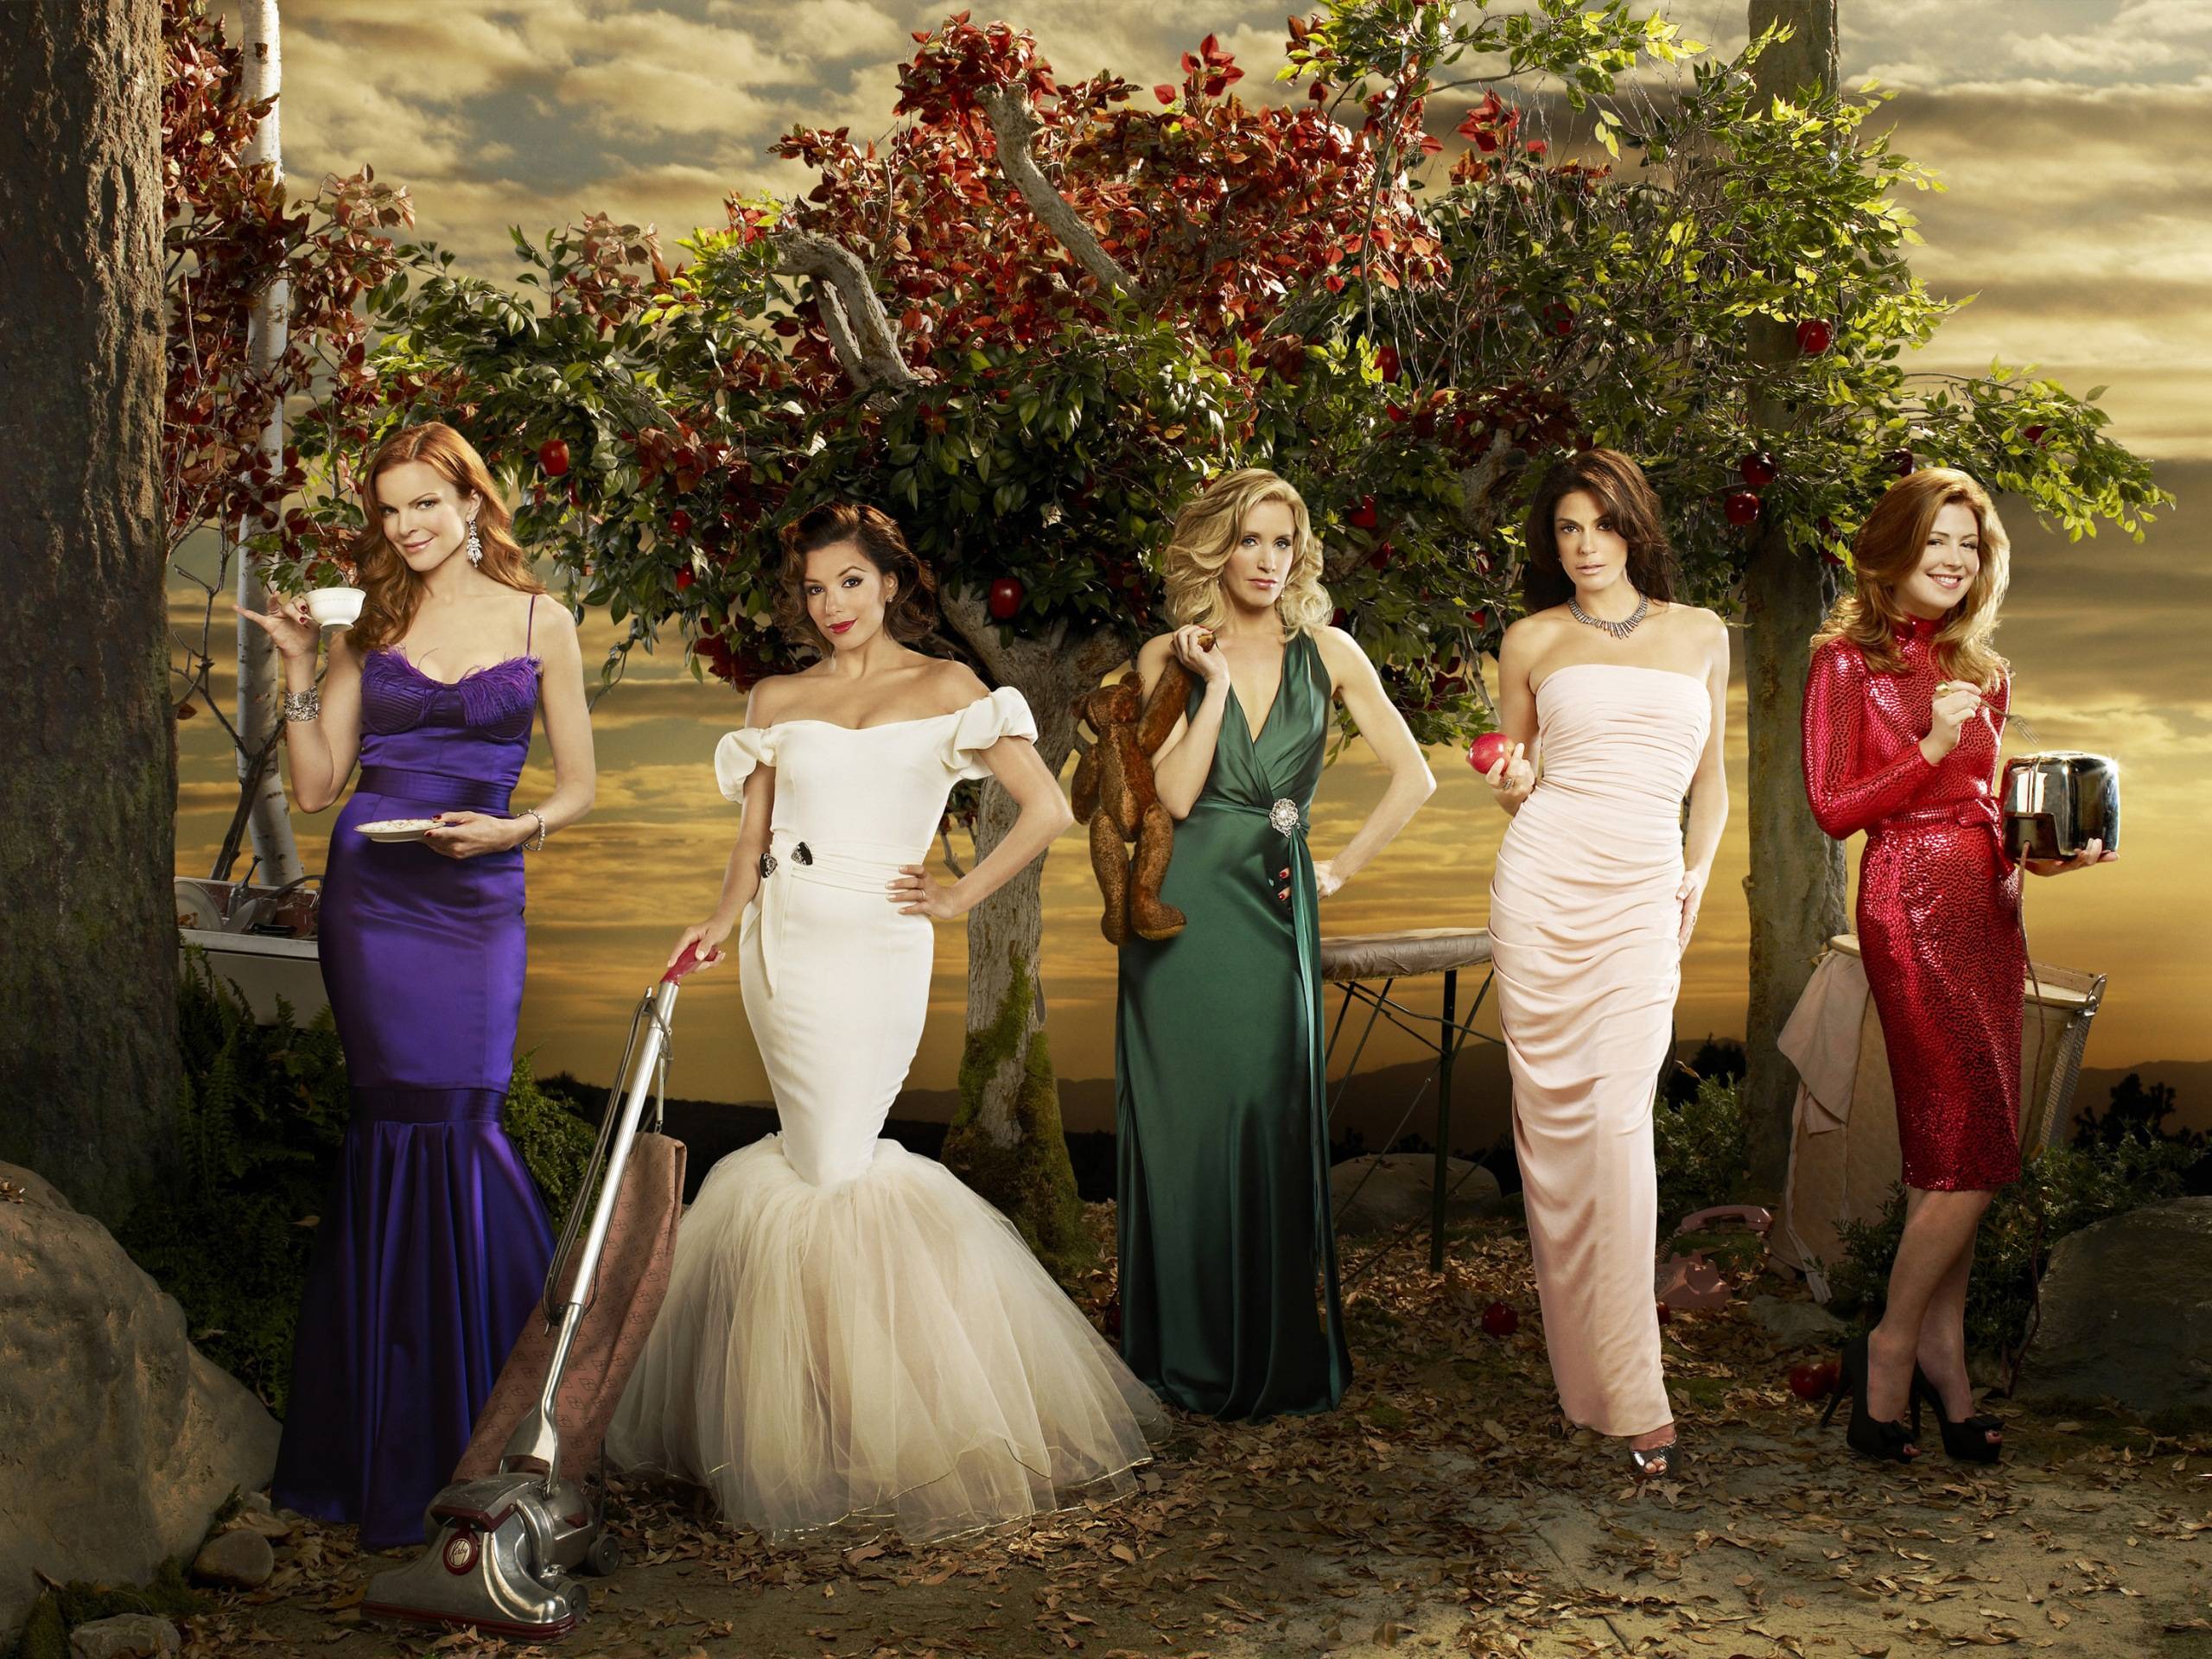 Desperate Housewives Wallpaper. Desperate Housewives Background